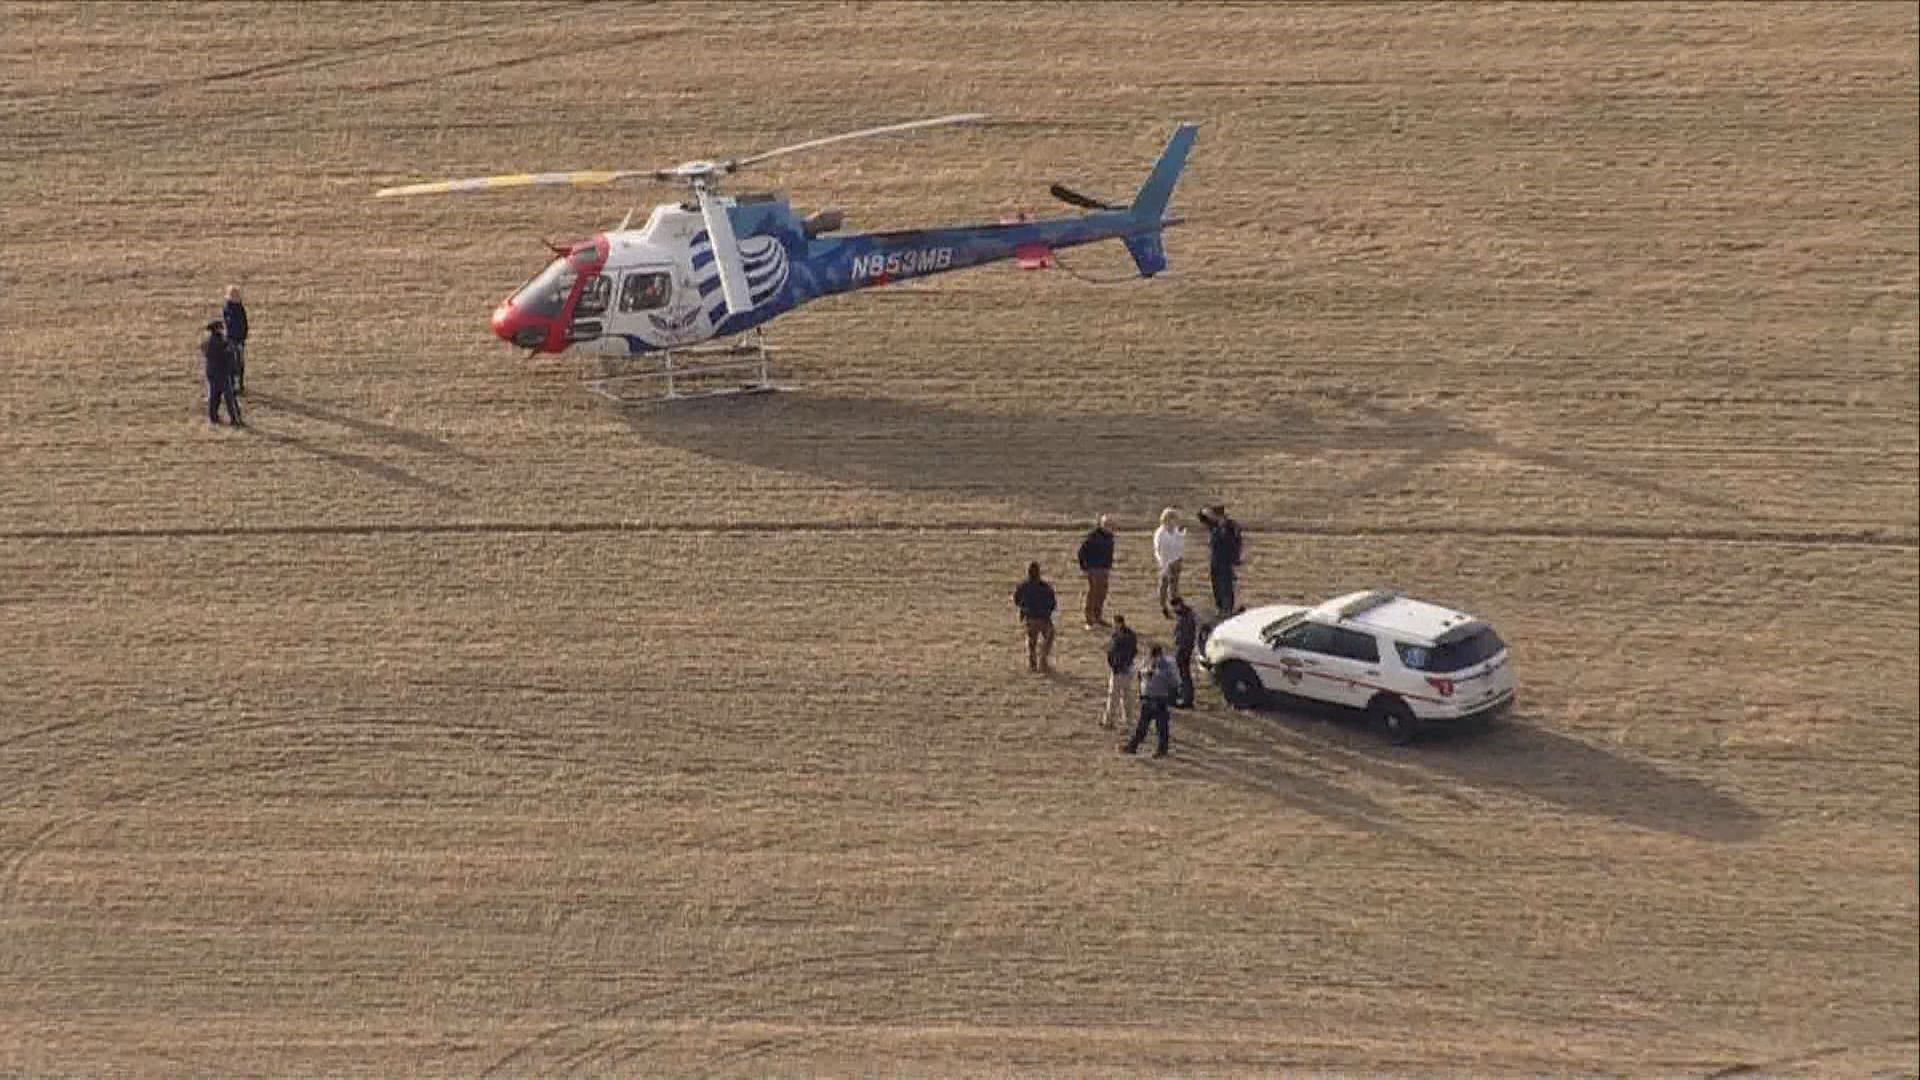 No one was injured when the helicopter made an emergency landing after hitting a bird near Fort Morgan Tuesday.